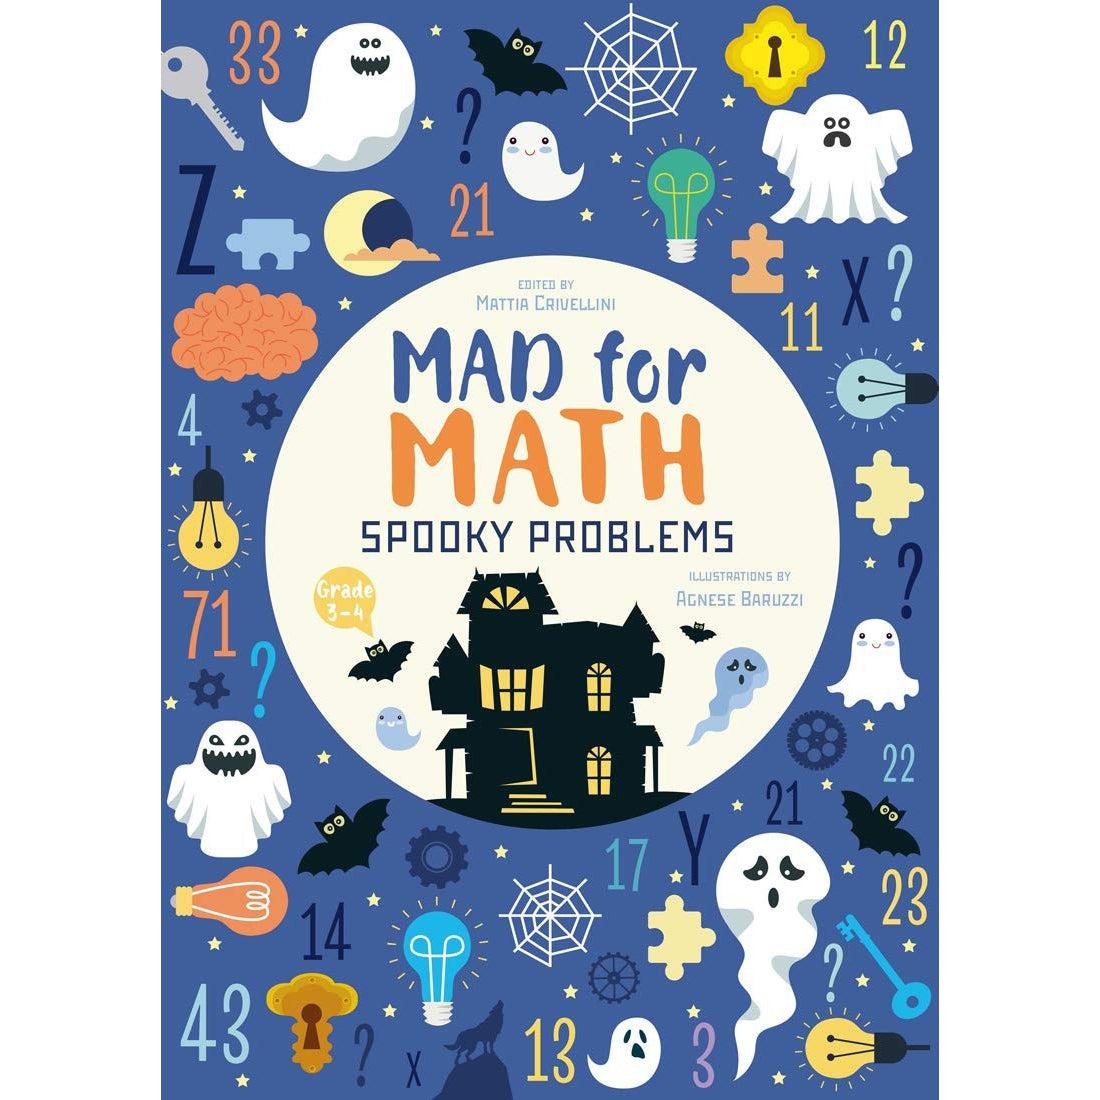 Spooky Problems: Mad For Math